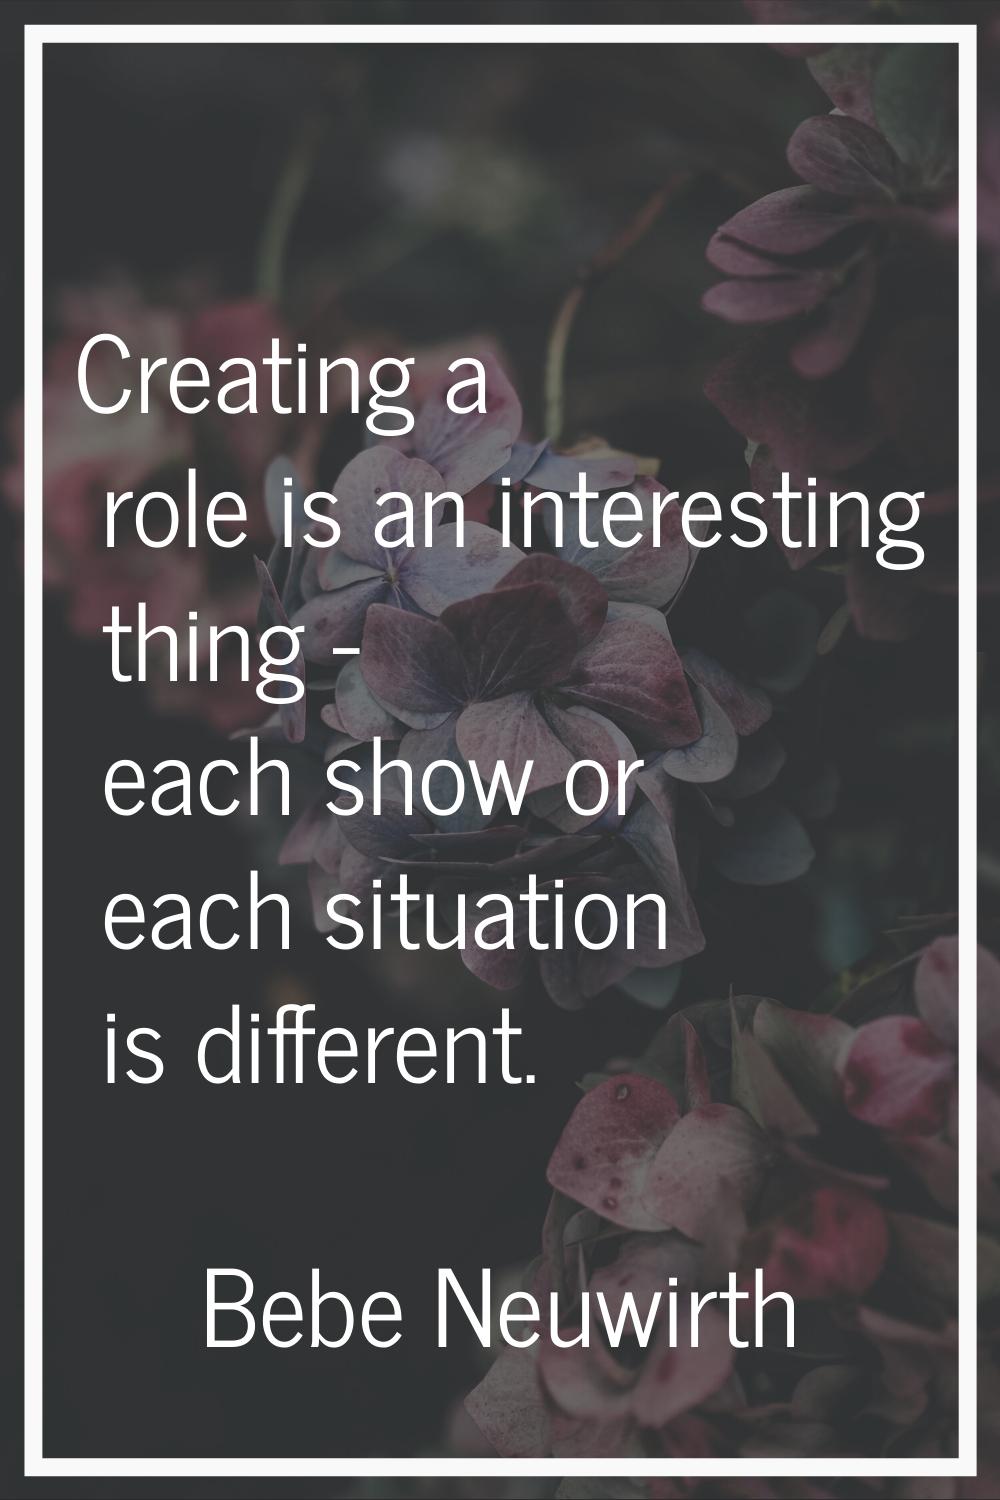 Creating a role is an interesting thing - each show or each situation is different.